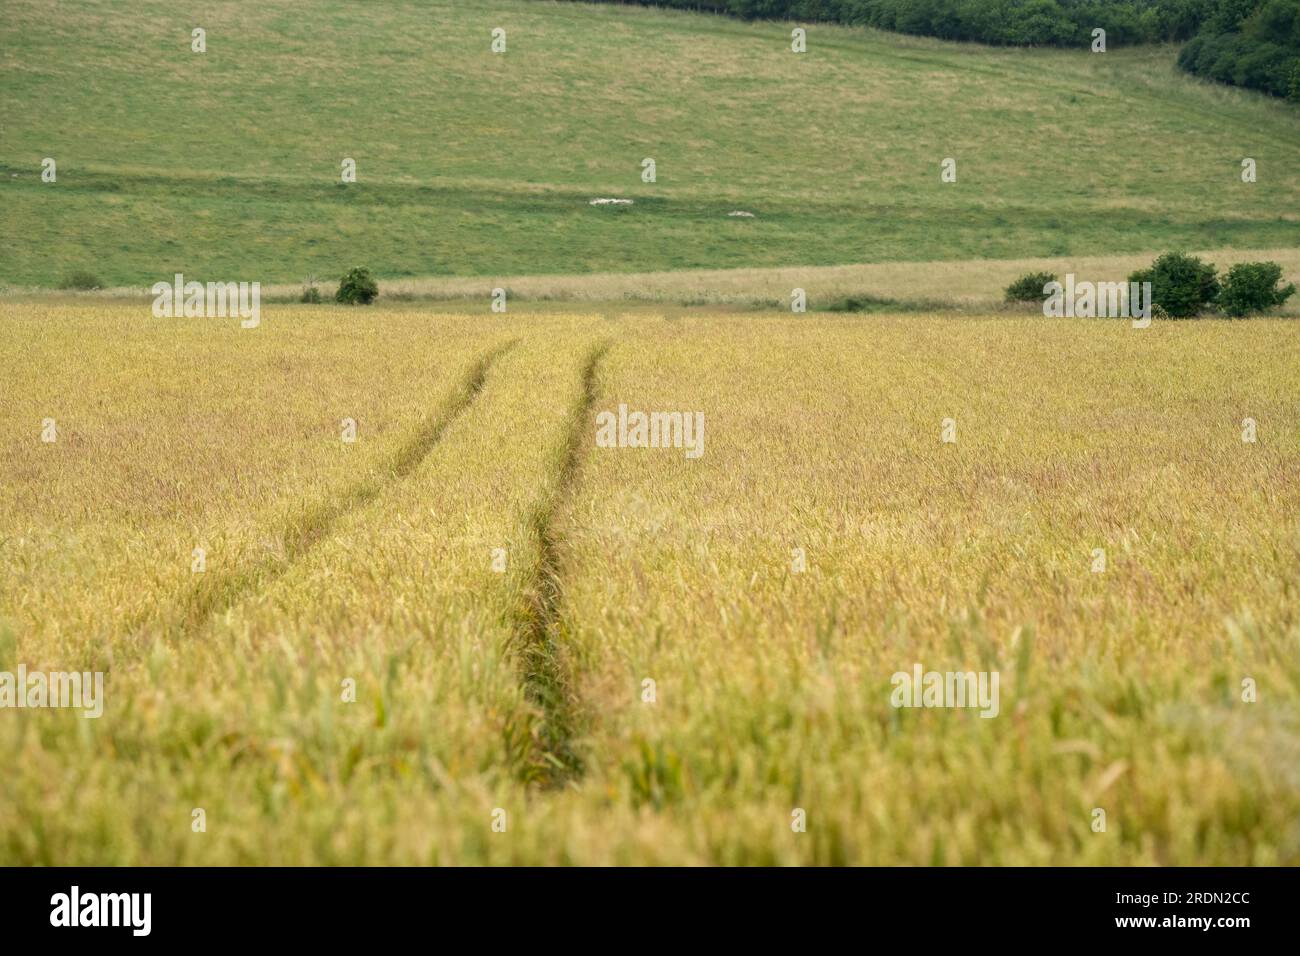 tractor wheel lines through a field of summer wheat Stock Photo